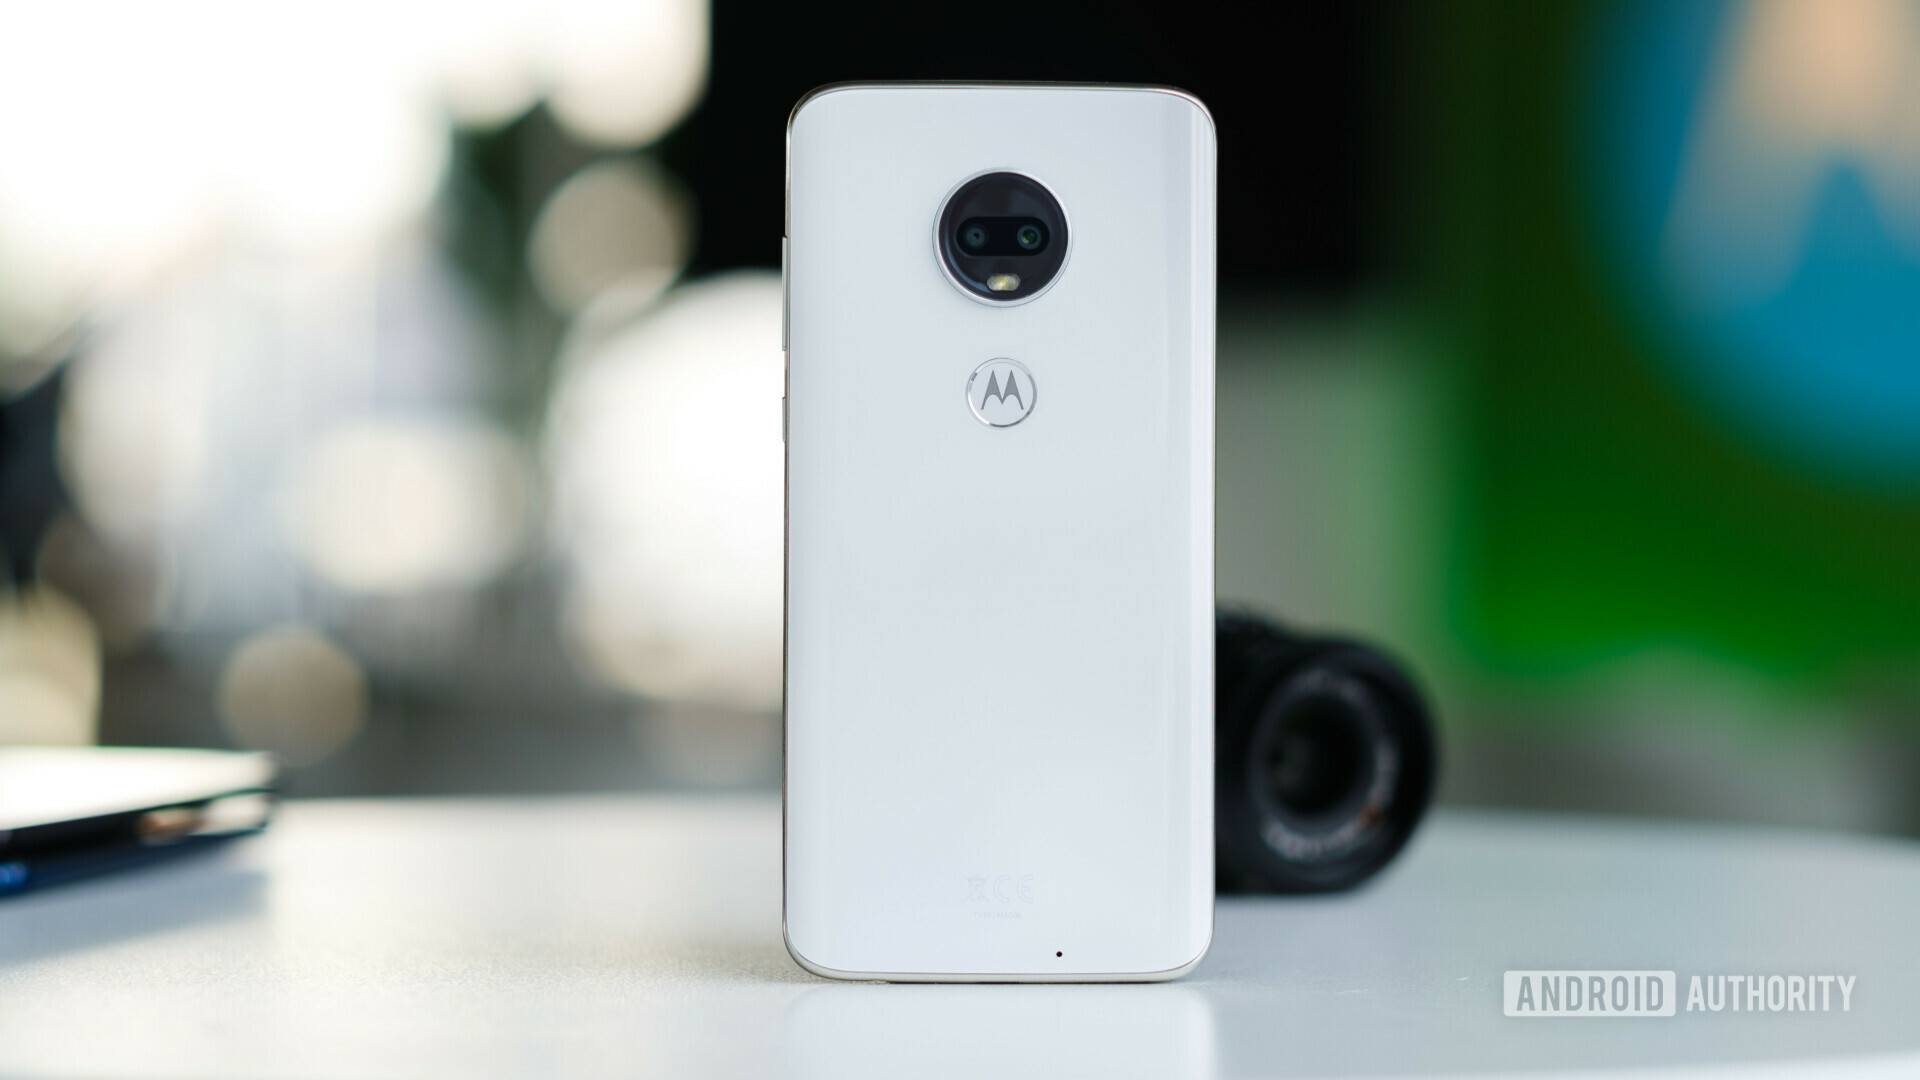 The Motorola Moto G8 is tipped to offer a solid upgrade over the Moto G7.